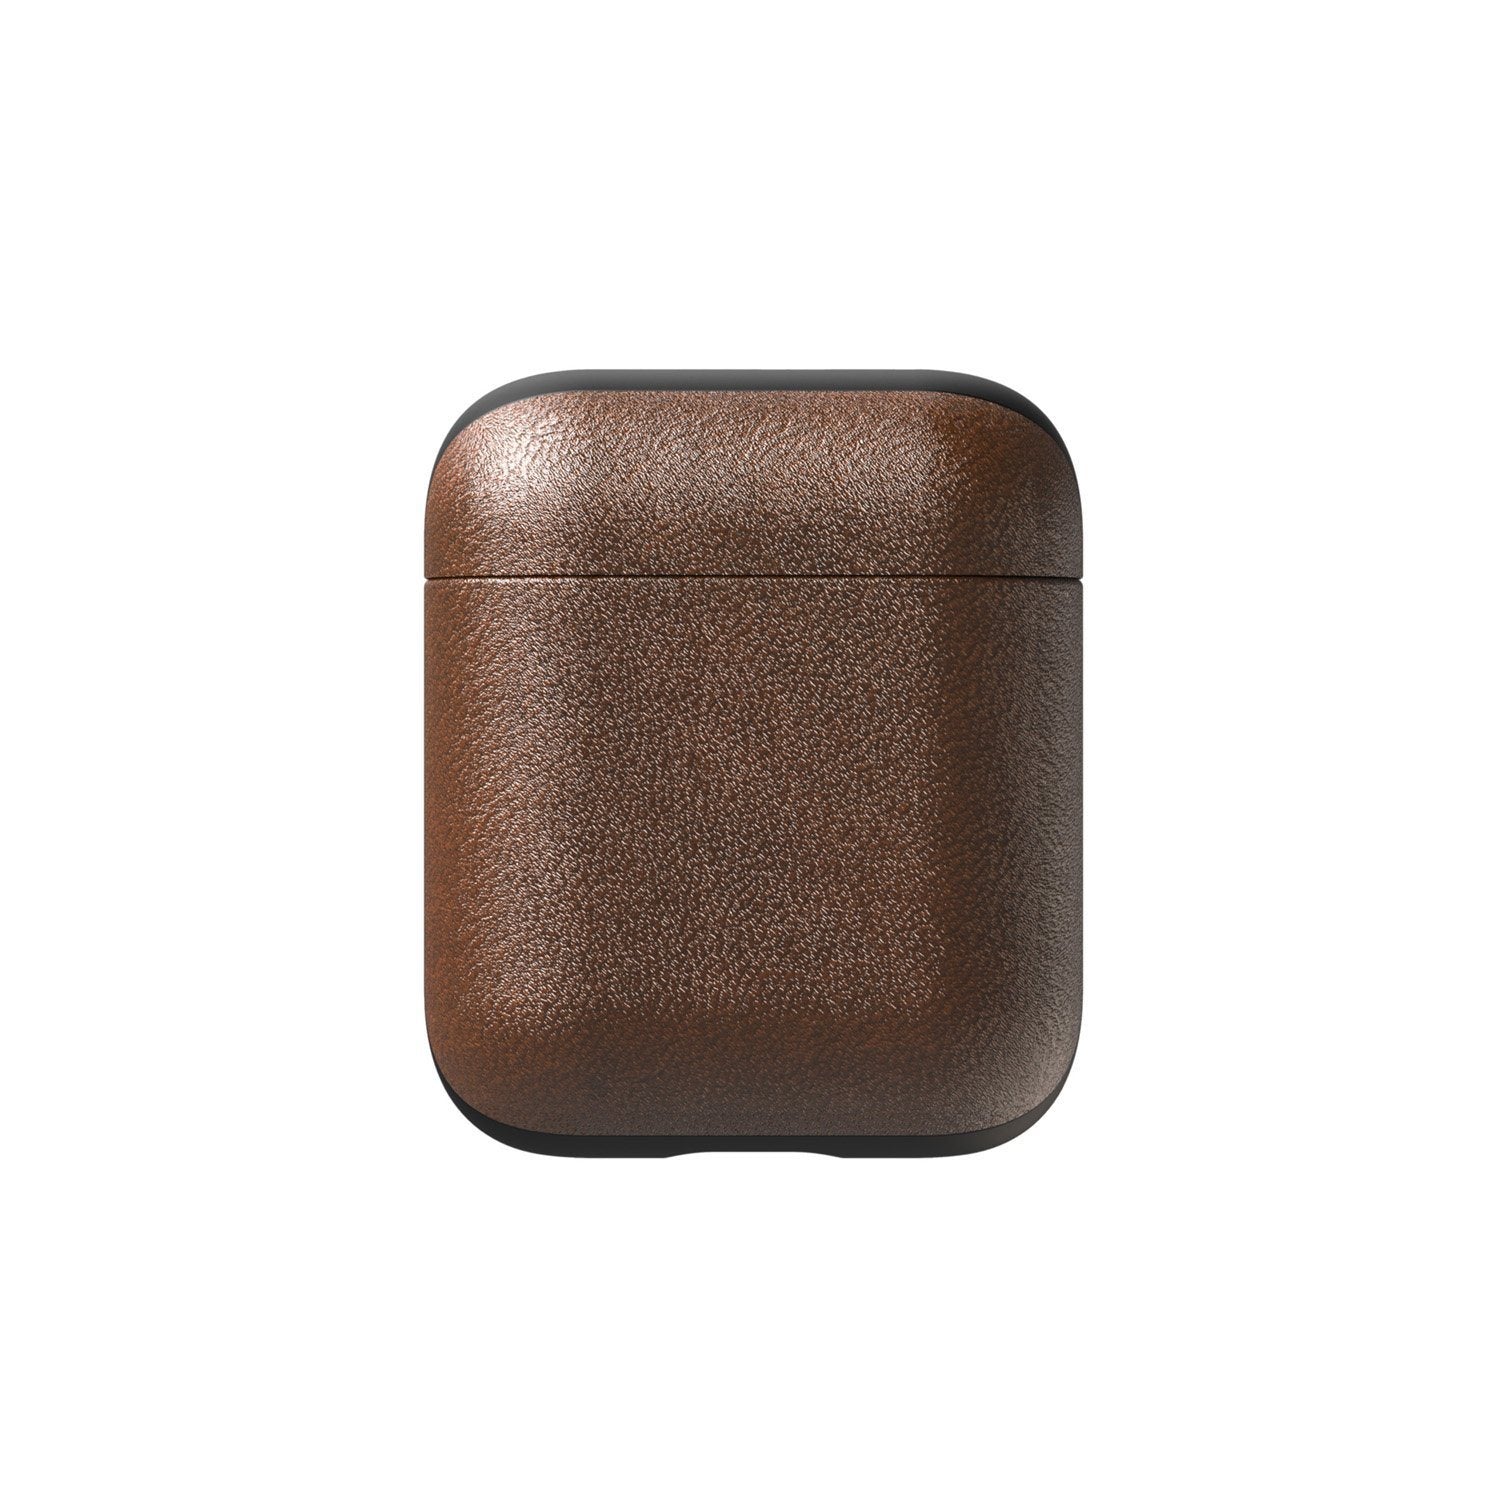 NOMAD Rugged Horween Leather Case for Airpods 1/2, Brown Airpods Case NOMAD 